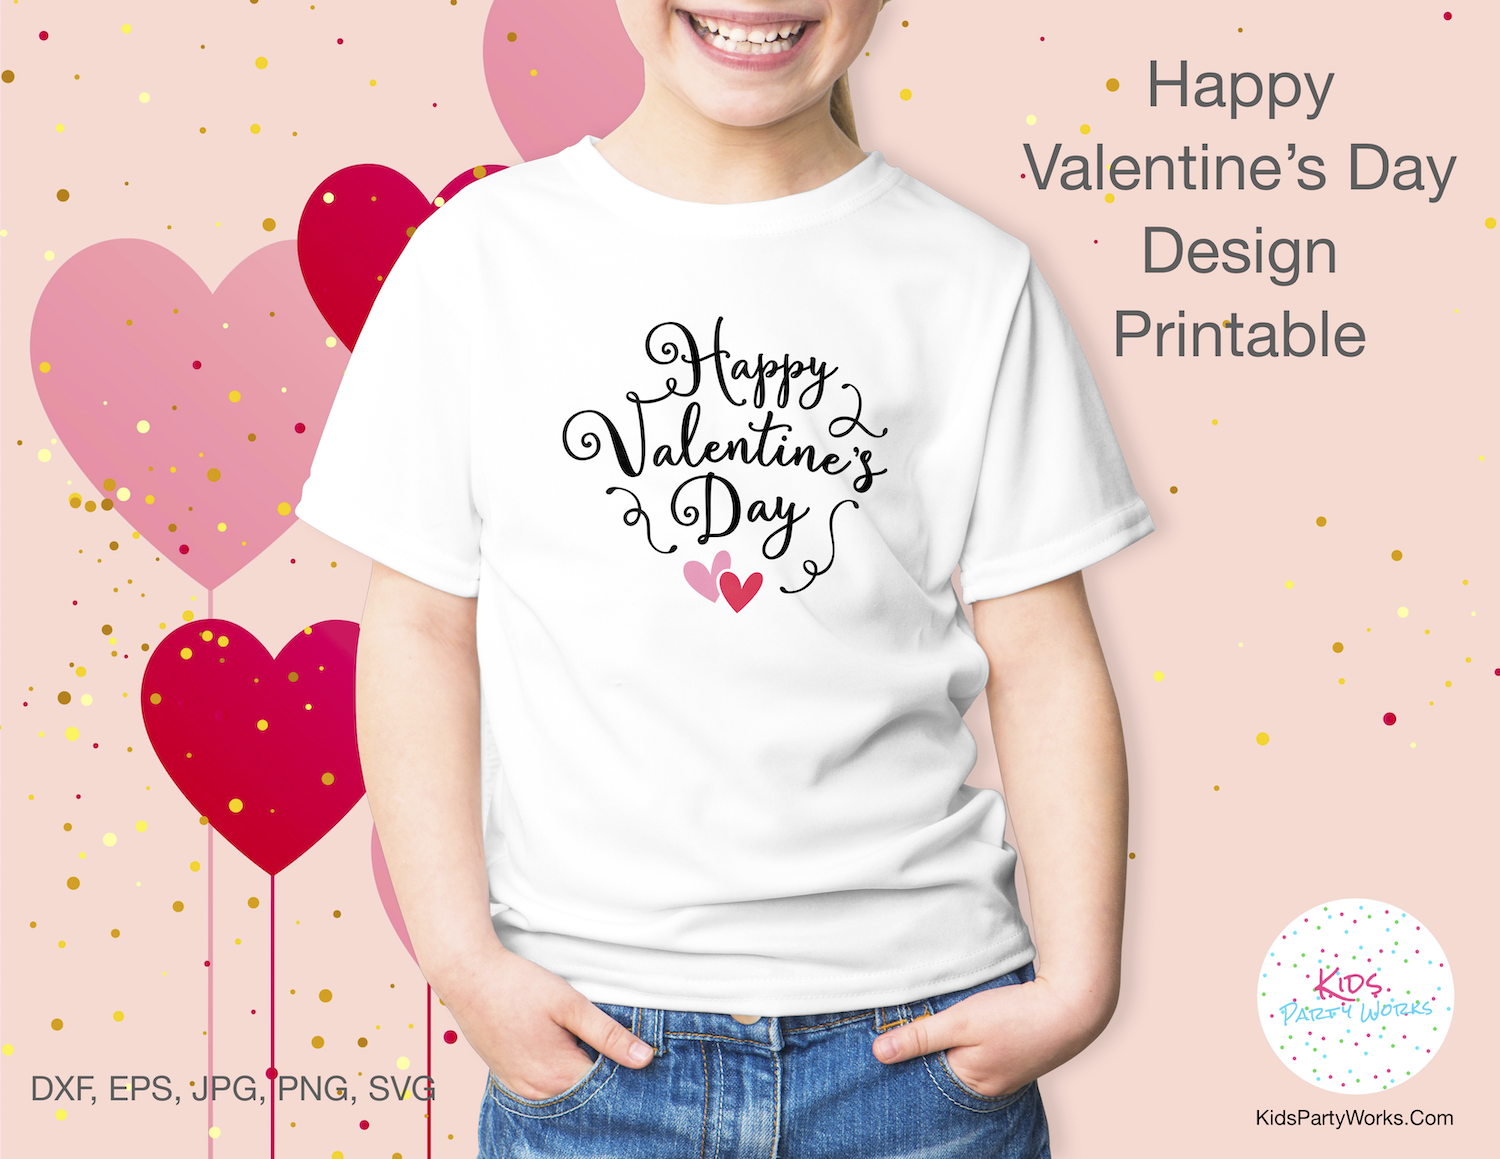 Free Valentine Quote - Great for t-shirts, wall art and Valentine cards. Find lots of free printables at KidsPartyWorks.Com